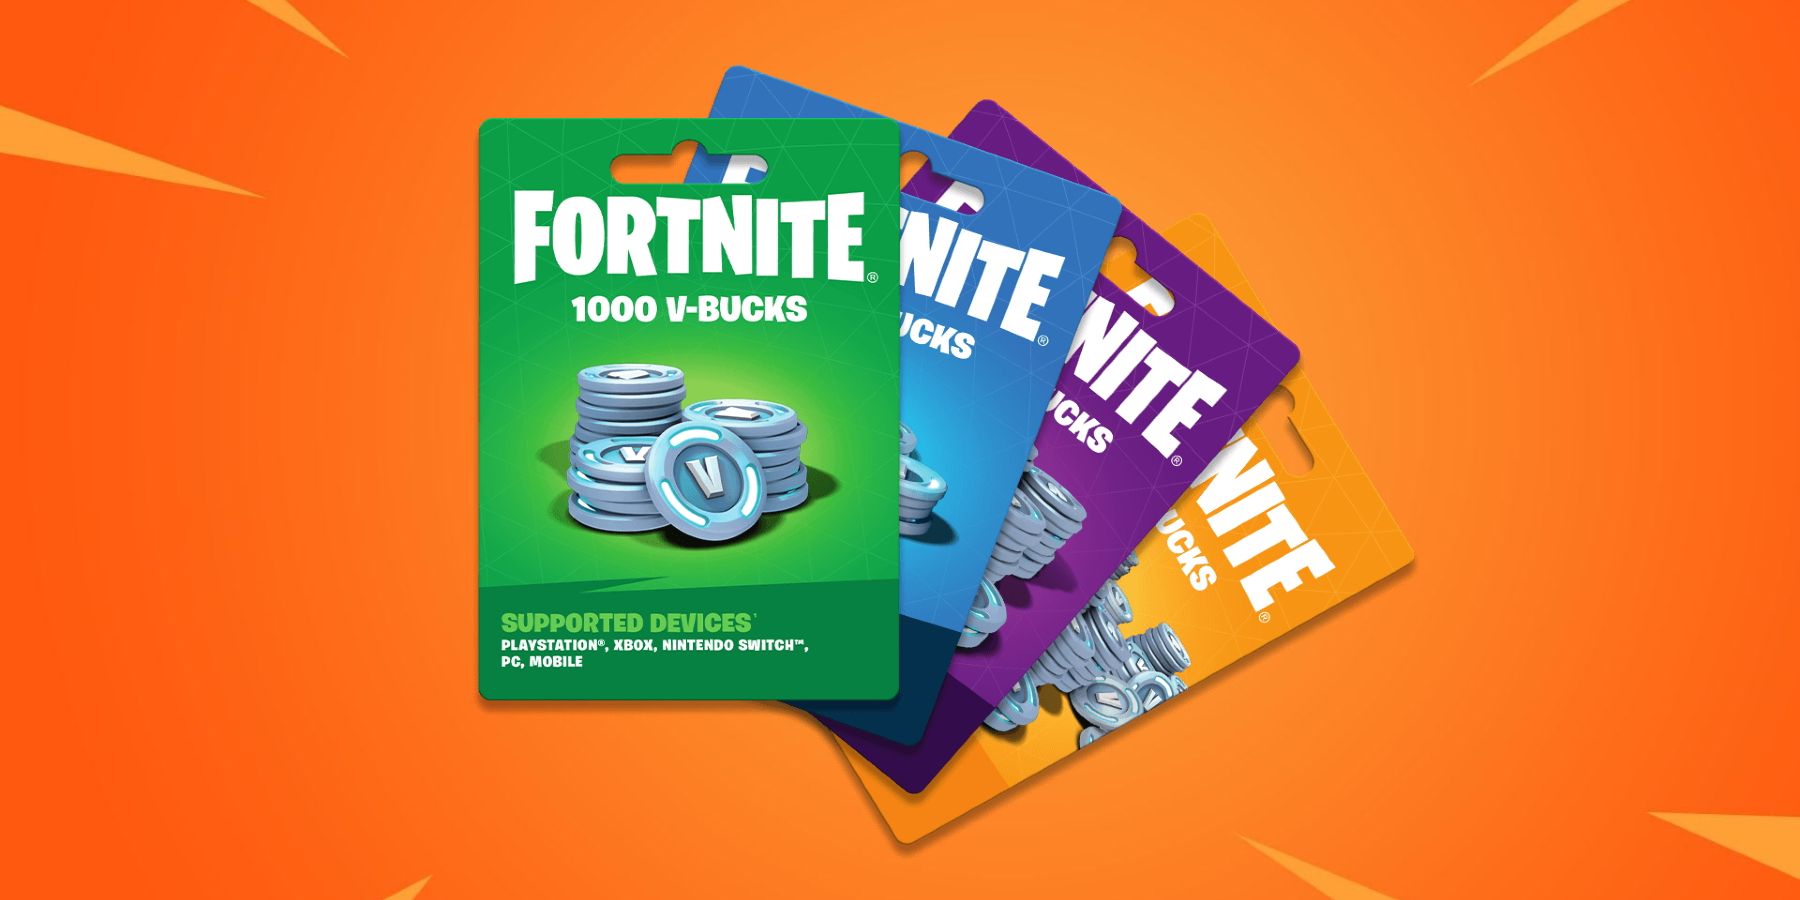 How to Redeem Fortnite Gift Card (2022)